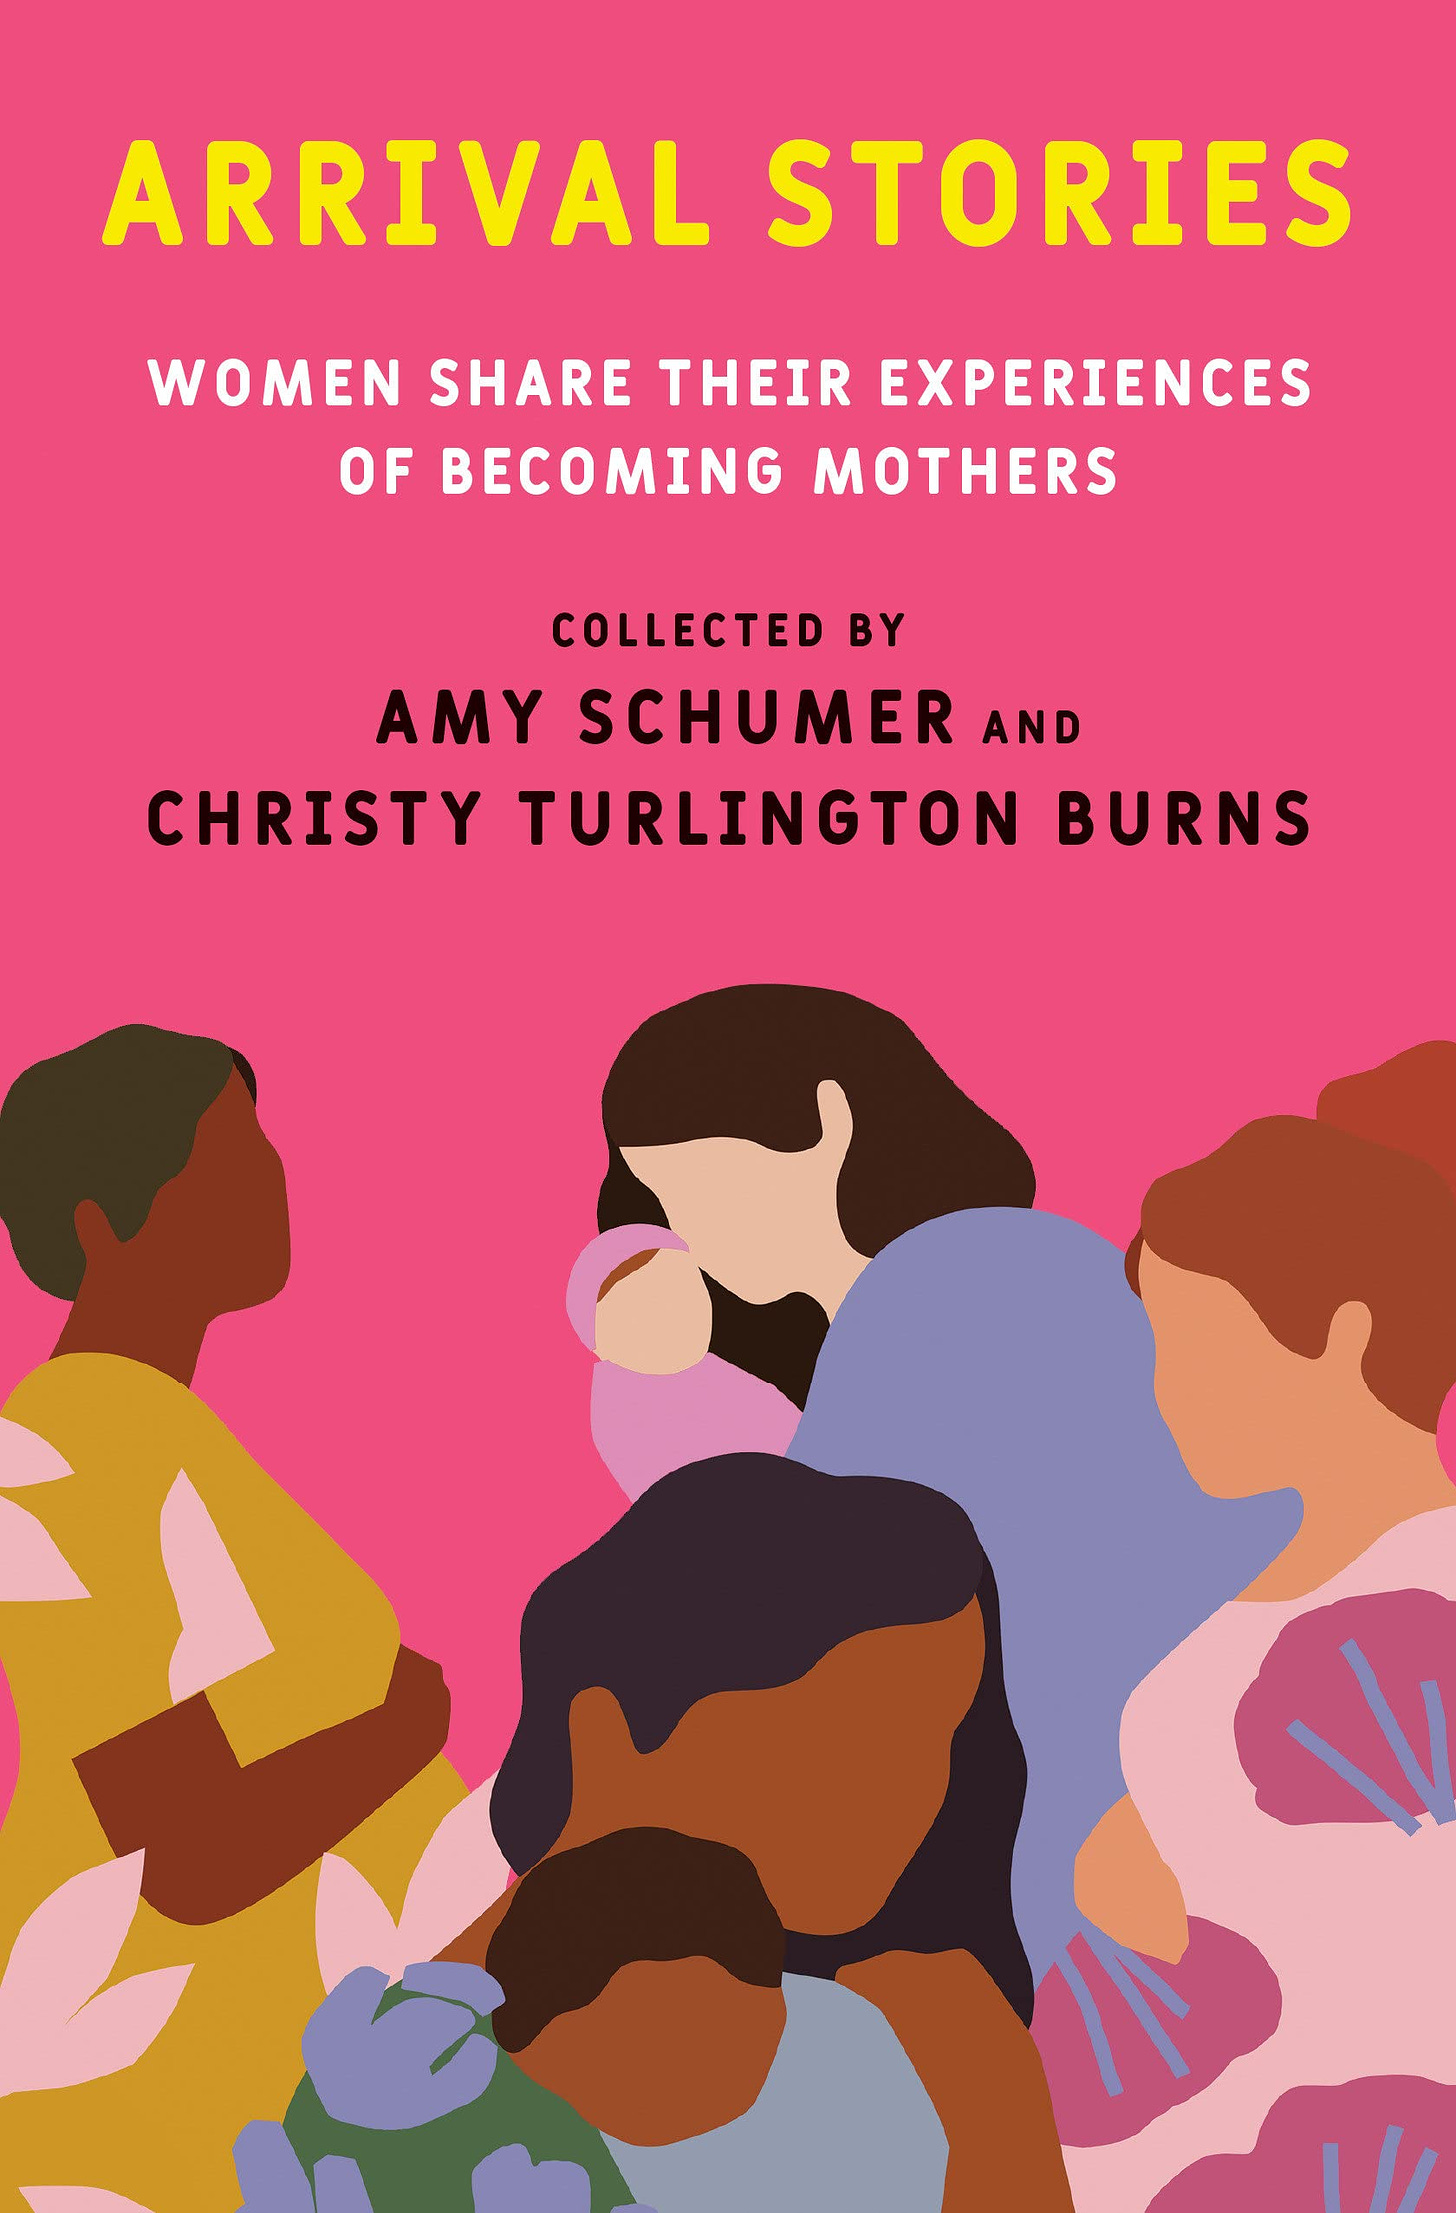 The book cover for "Arrival Stories: Women Share Their Experiences of Becoming Mothers" collected by Amy Schumer and Christy Turlington Burns